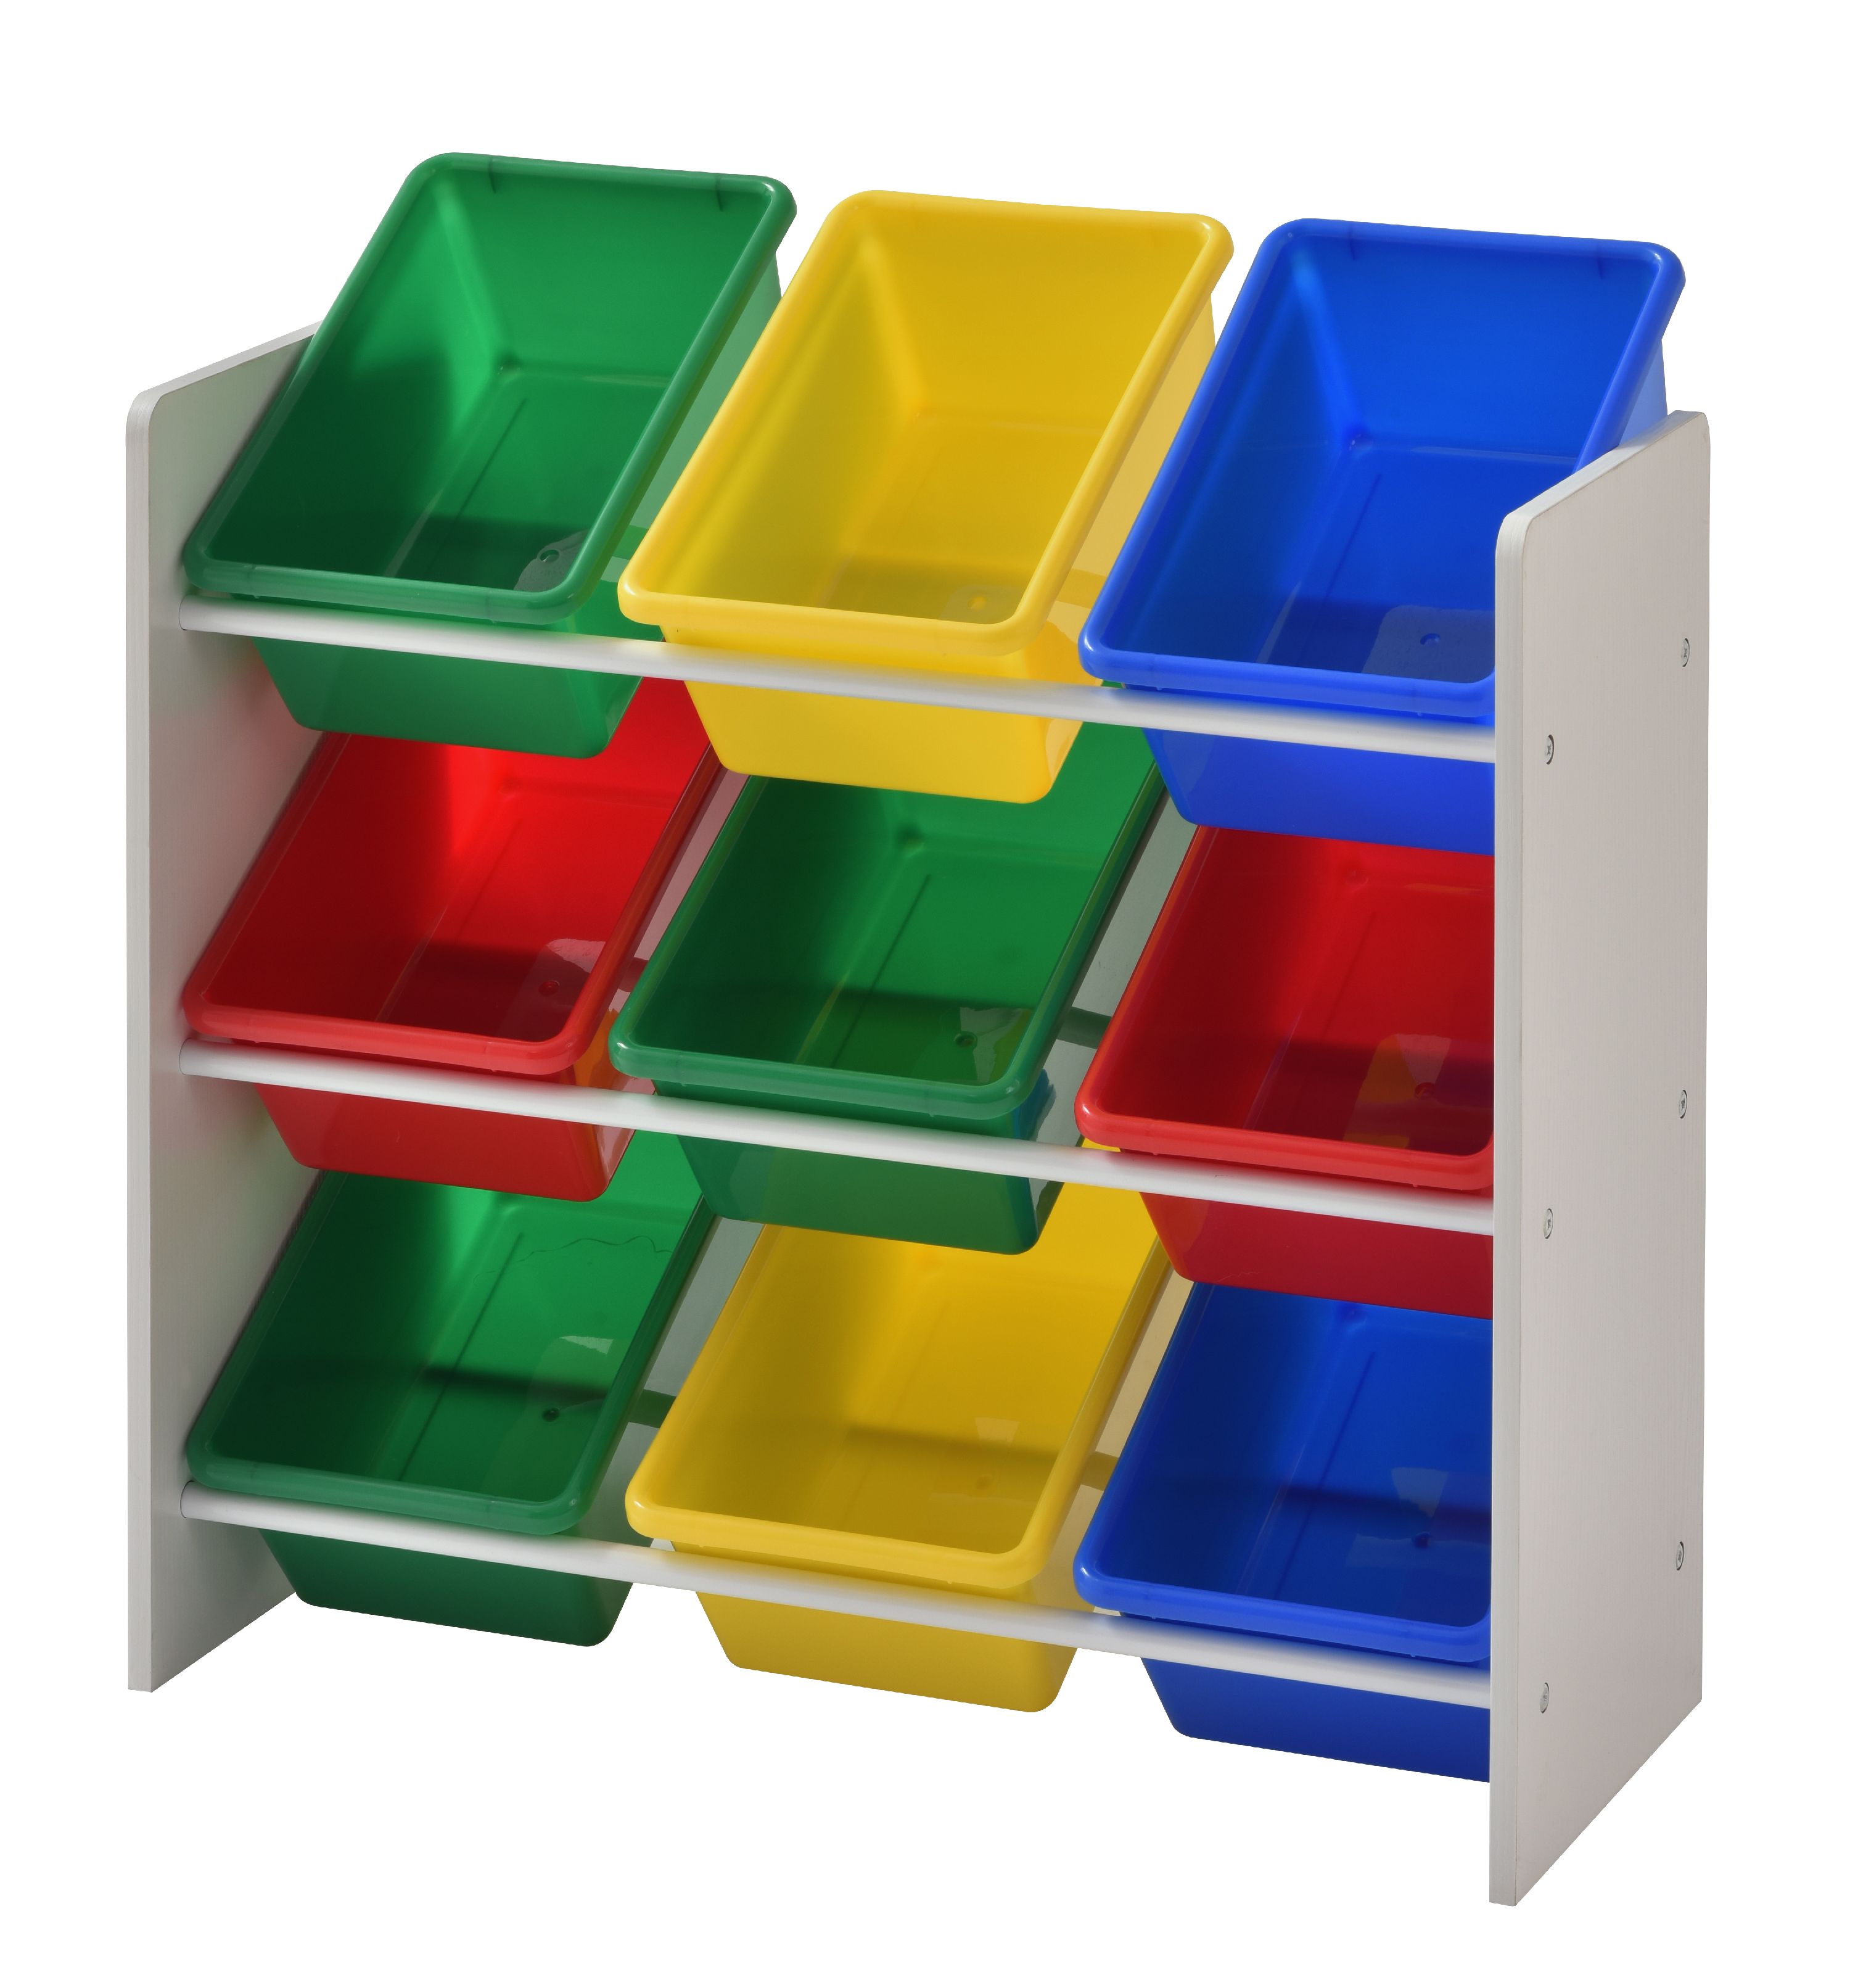 Muscle Rack Kids Storage Organizer with 9 Multi color Bins - image 1 of 3